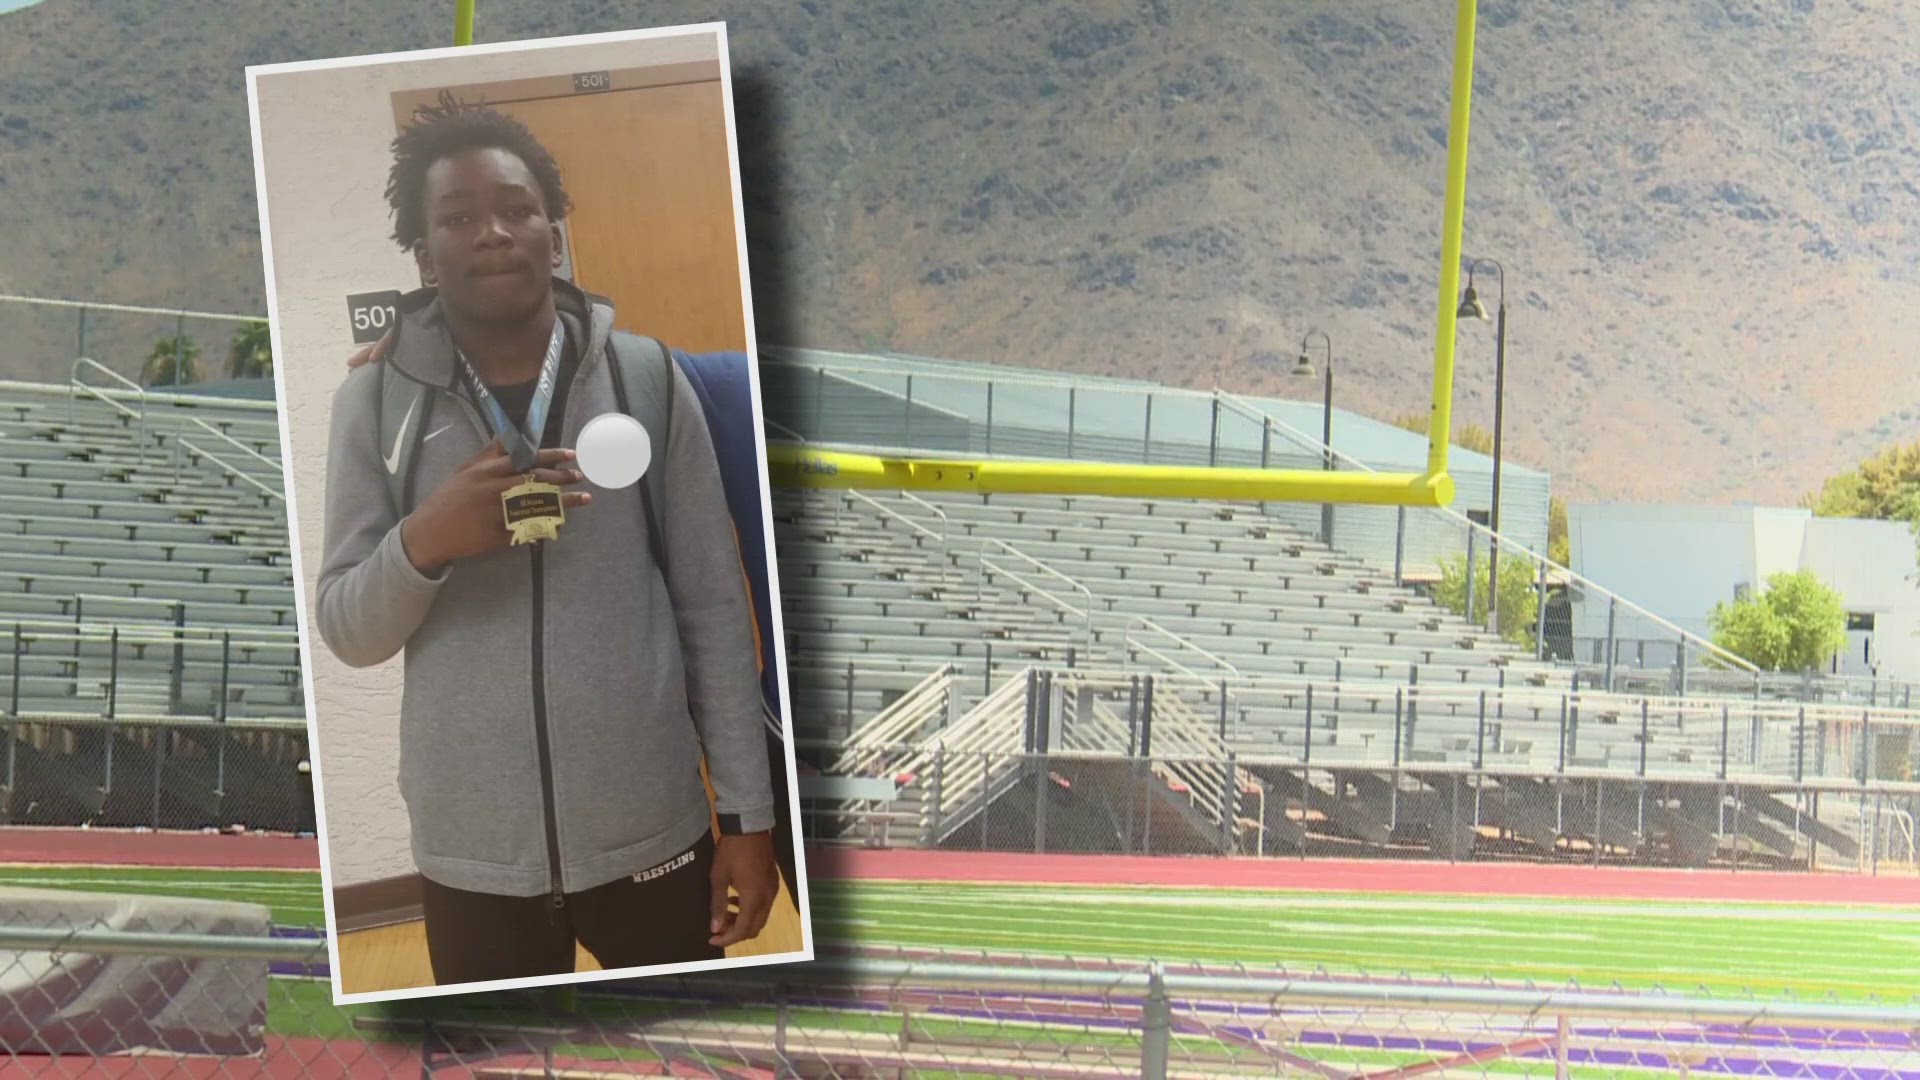 15-year-old Christopher Hampton drowned while attending football camp with his Cesar Chavez High School football teammates. Now, we hear from his mother and coaches.